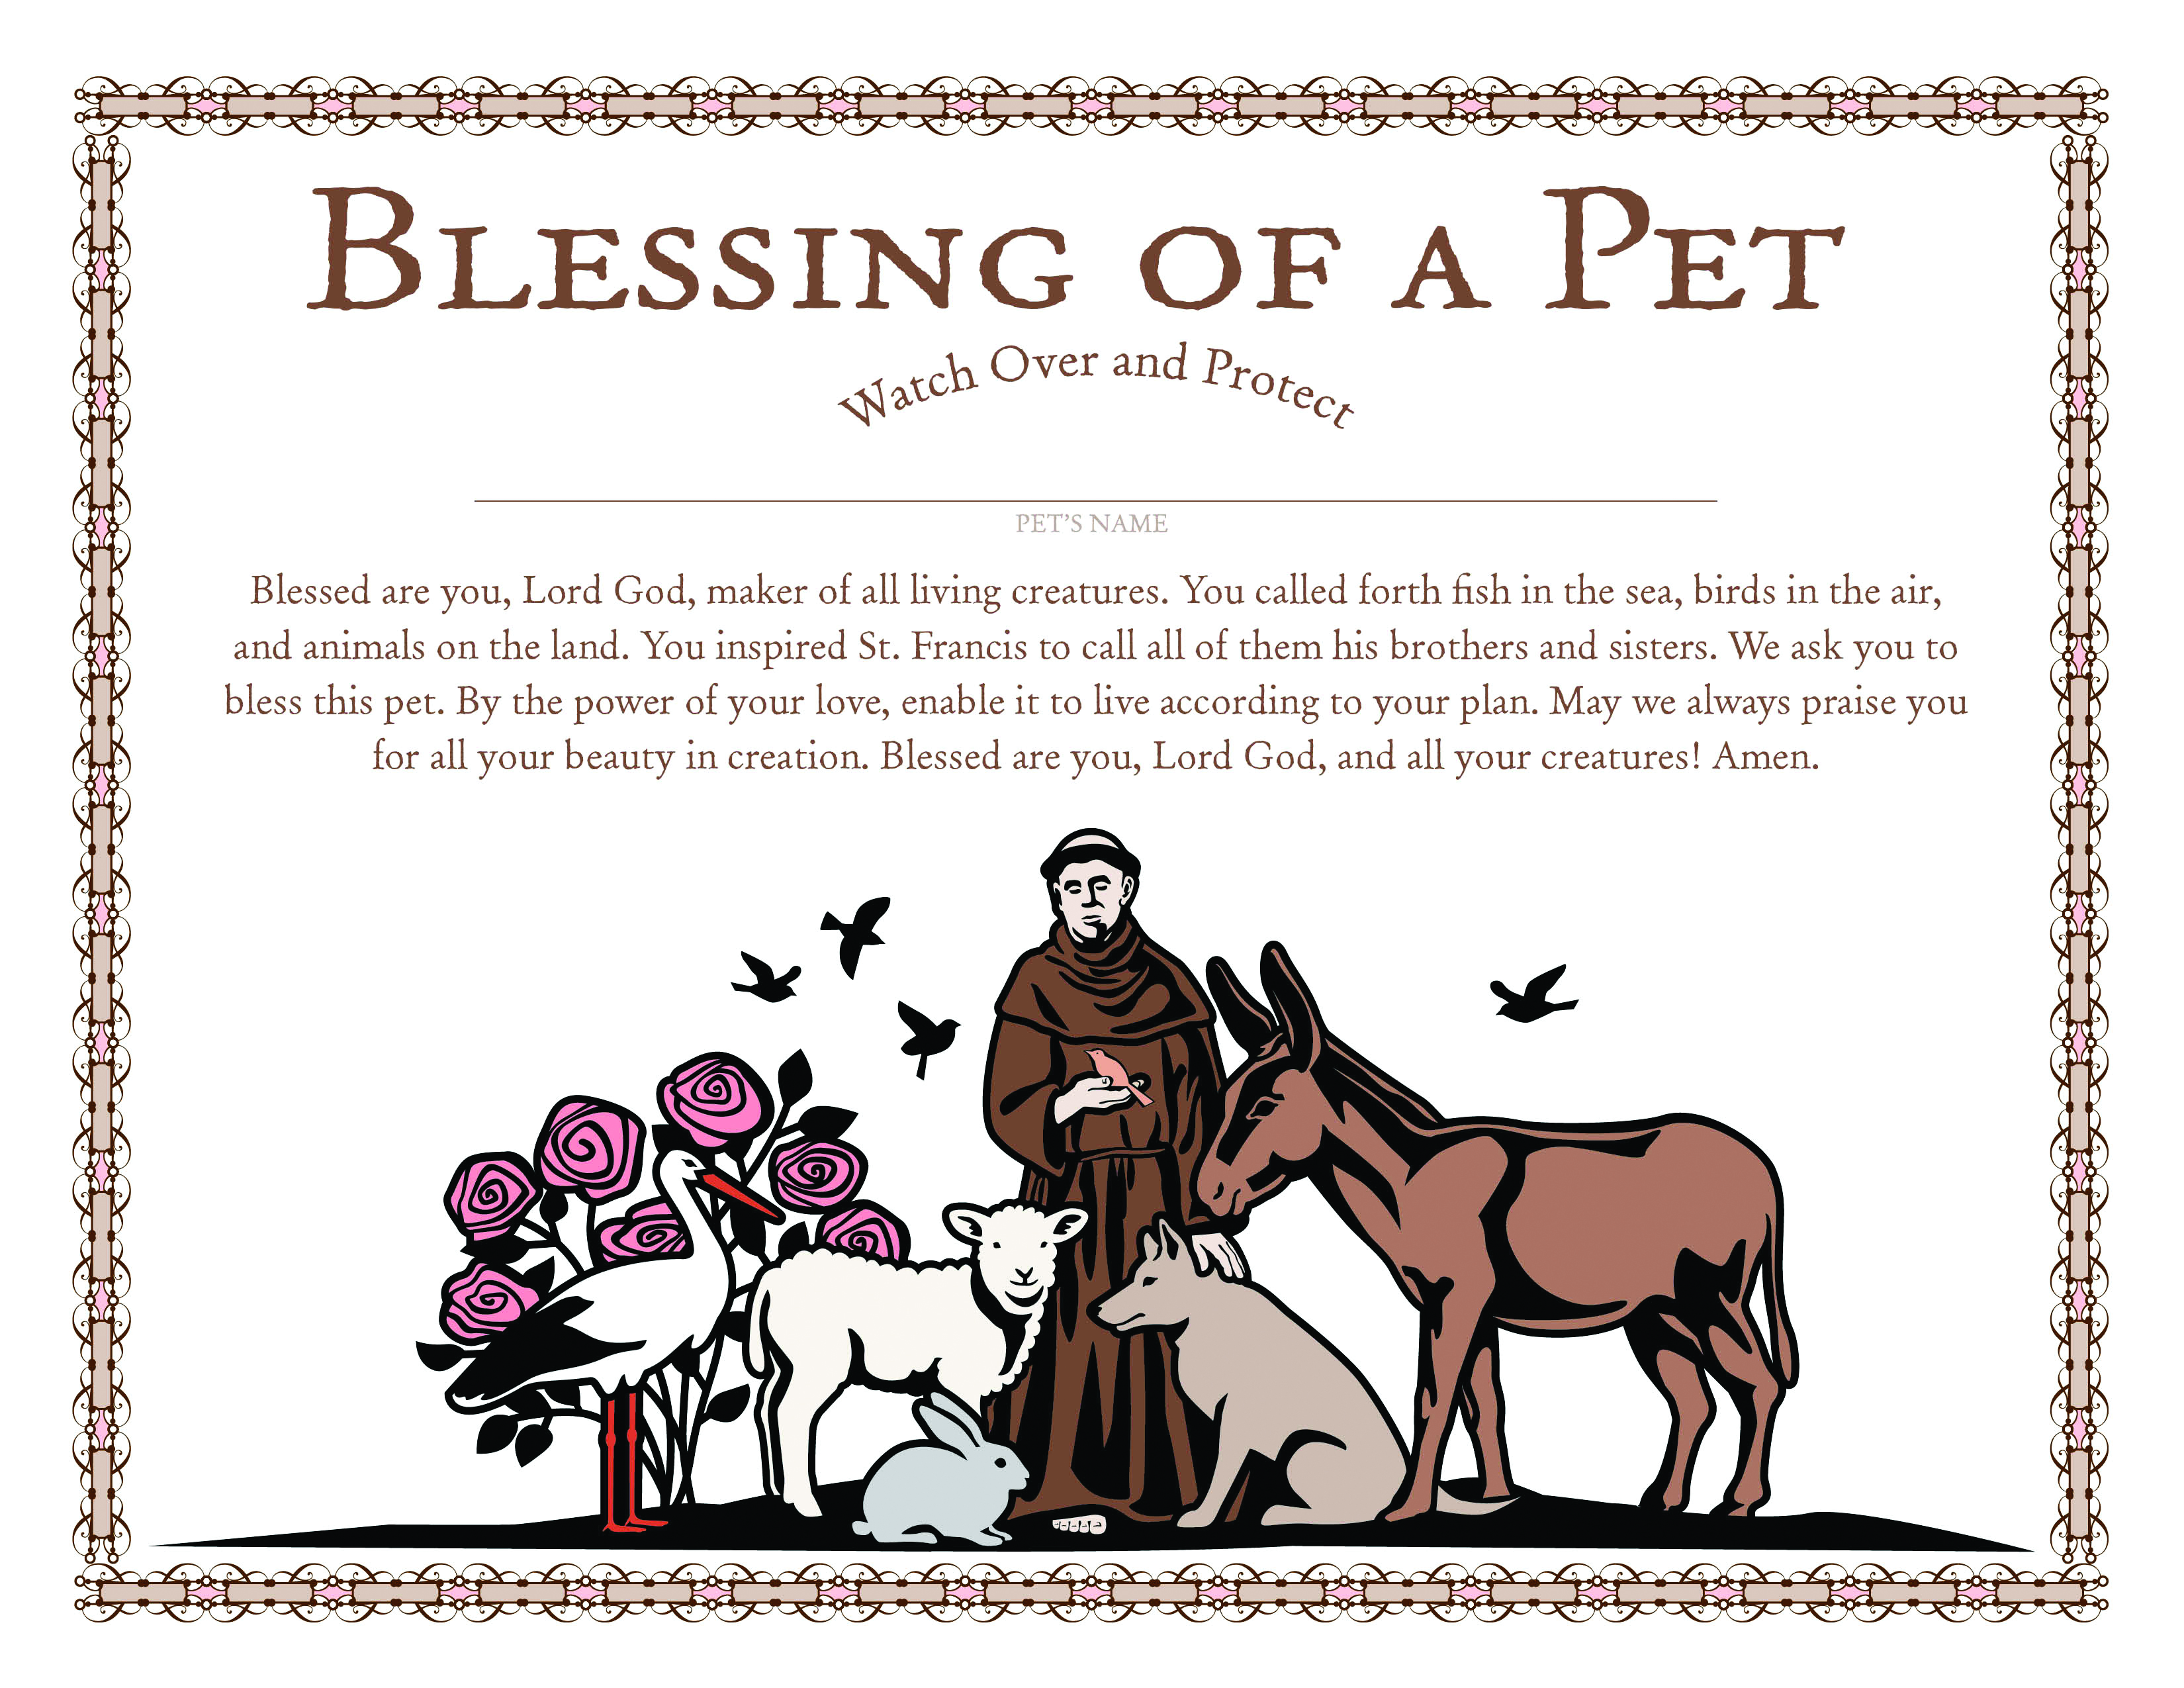 St. Francis Blessing of a Pet Certificate